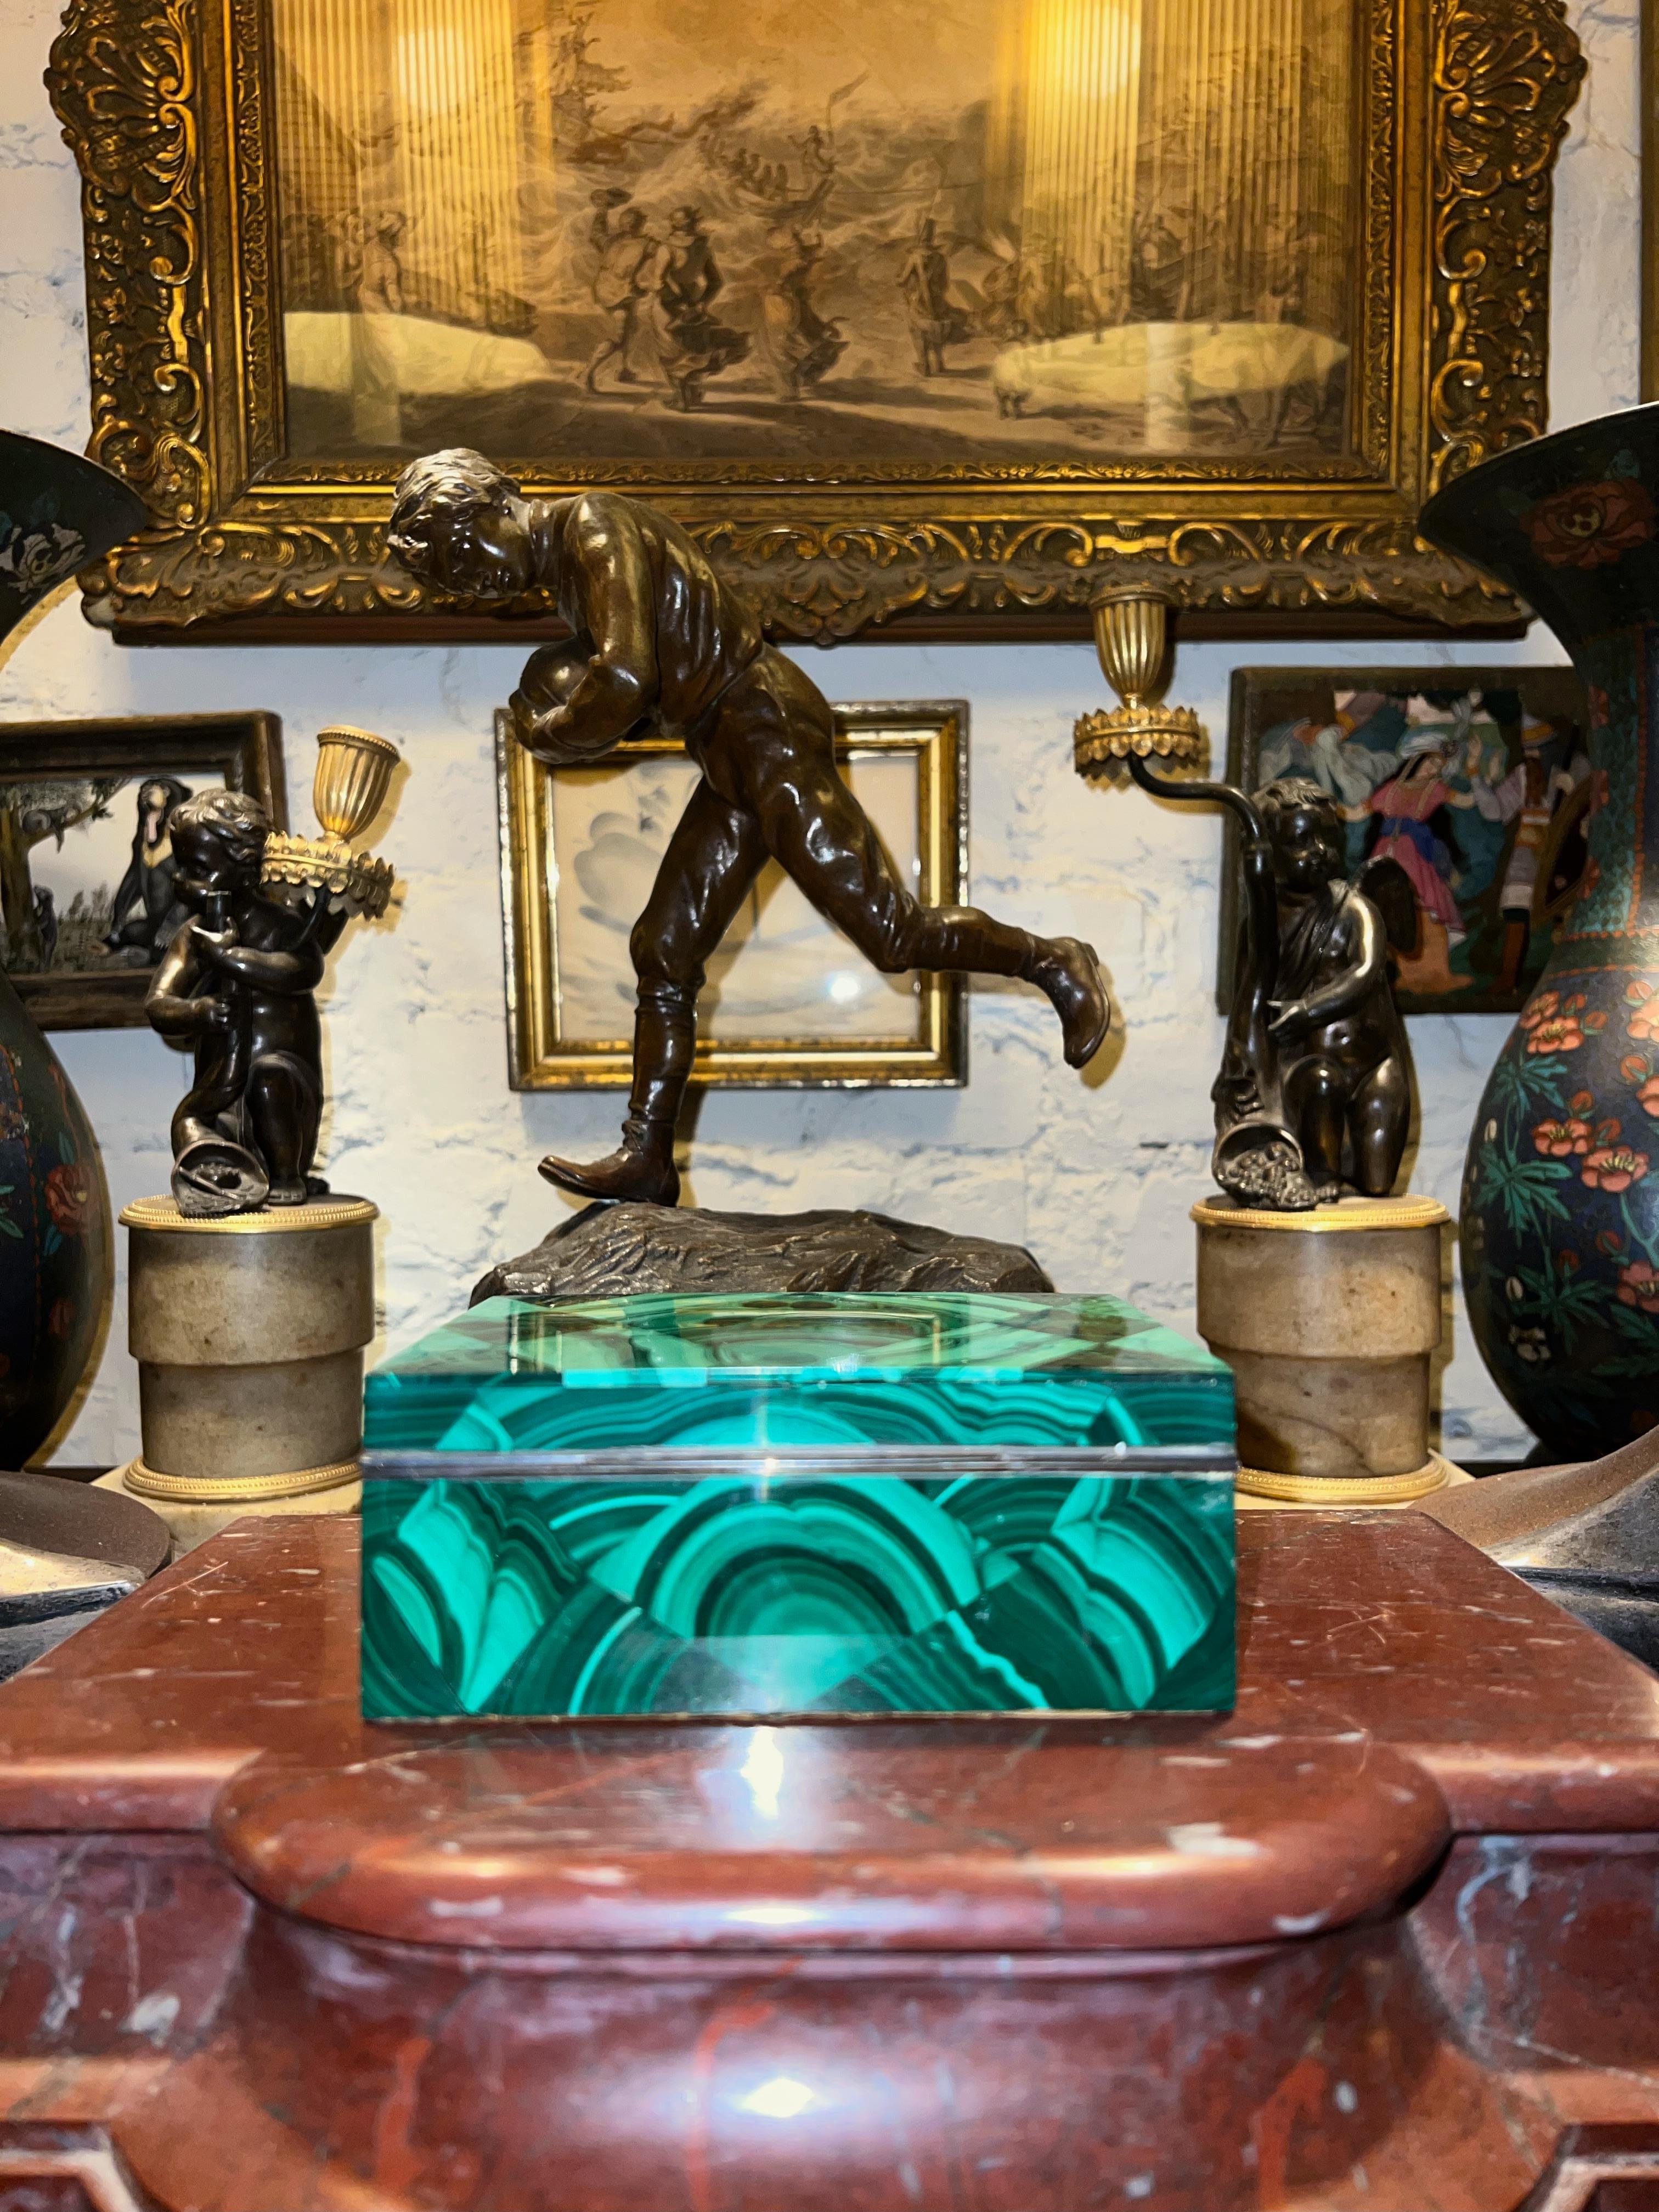 Mr. Giallo is opening his personal vault to sell a collection of his treasured antiques he's held on for so long.

About item
Rich Malachite Box with sterling silver trim and interior lined with red velvet. Could be used for your trinket statement